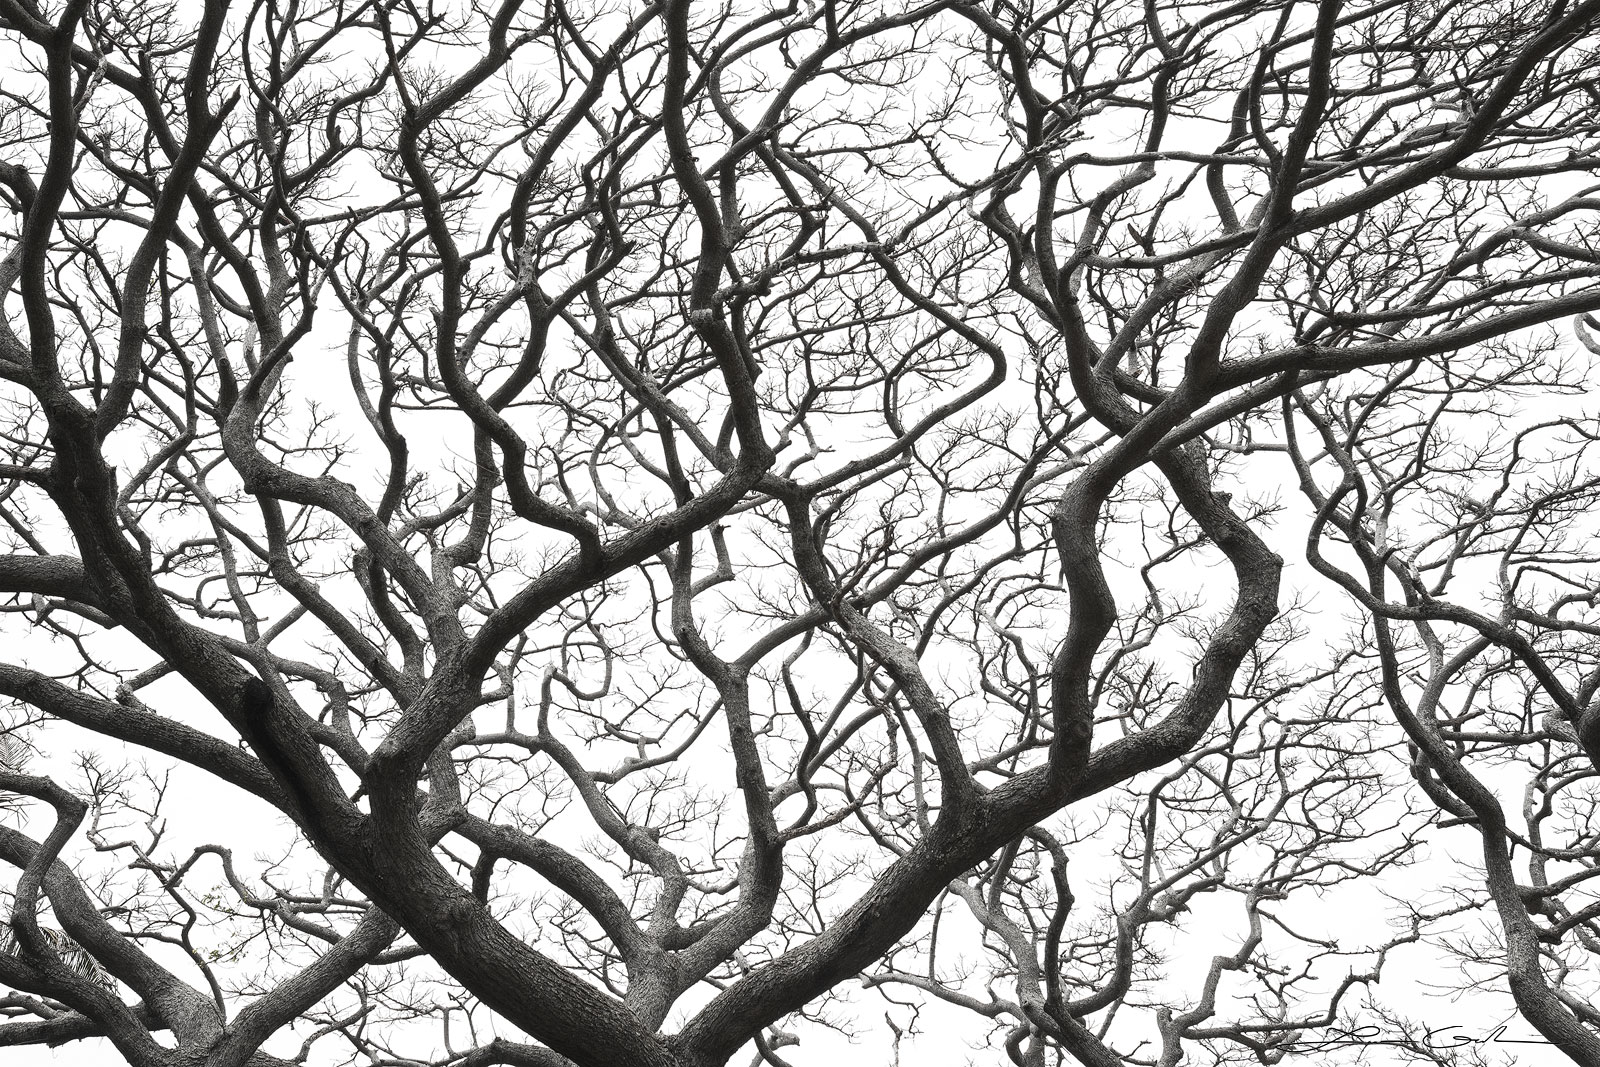 Black and white fine art photography featuring the intricate branch network of leafless trees against a stark white sky, reminiscent of a neural network - Gintchin Fine Art.